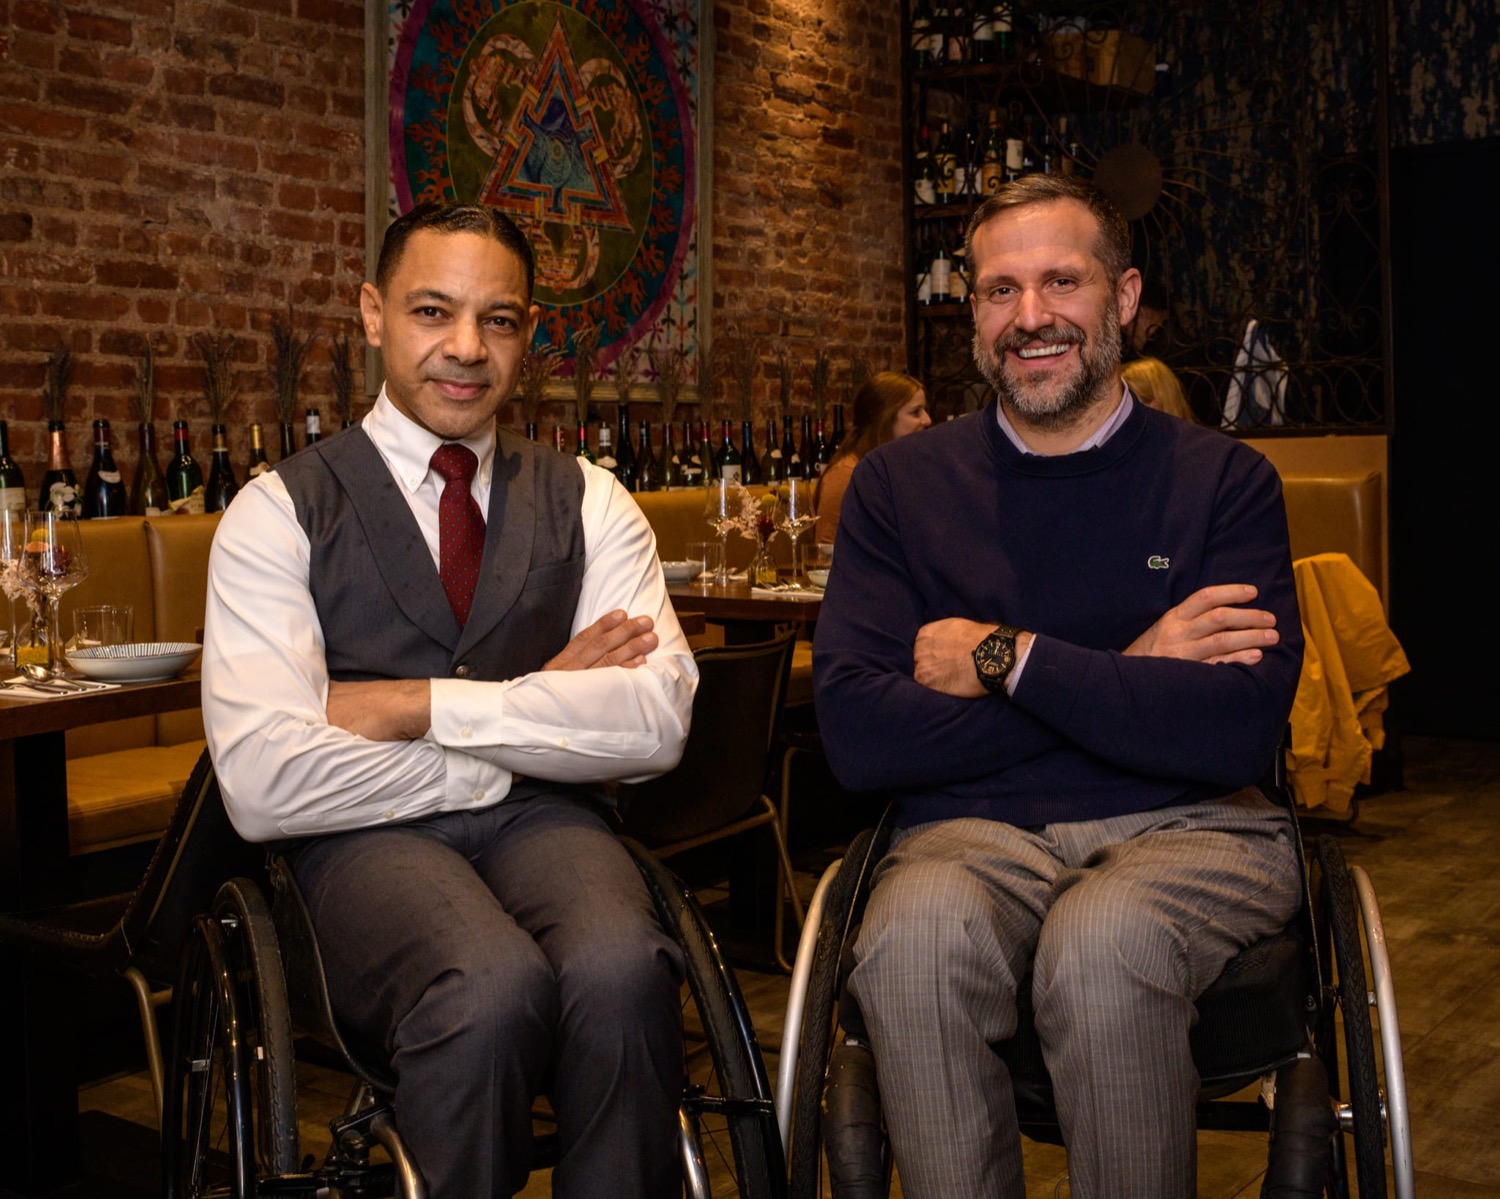 How This Restaurant Puts Accessibility and Inclusivity Front and Center